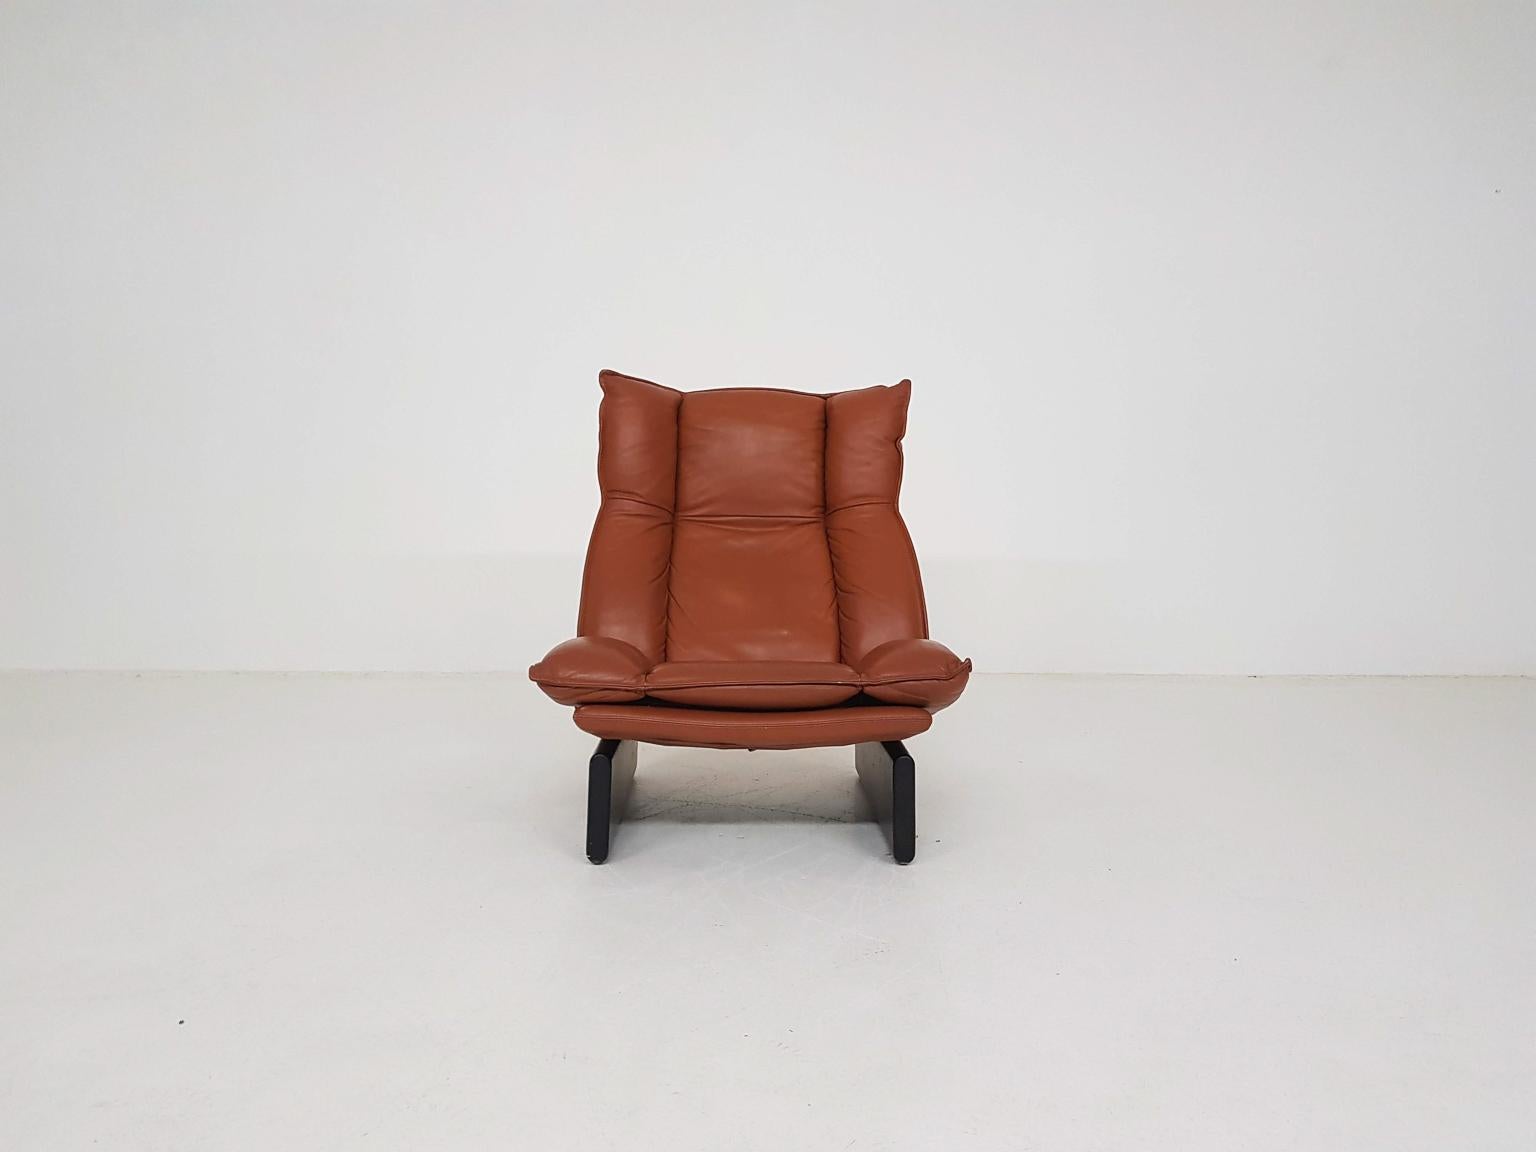 Late 20th Century Leather and Wood Lounge Chair by Leolux, Dutch Modern Design, 1970s